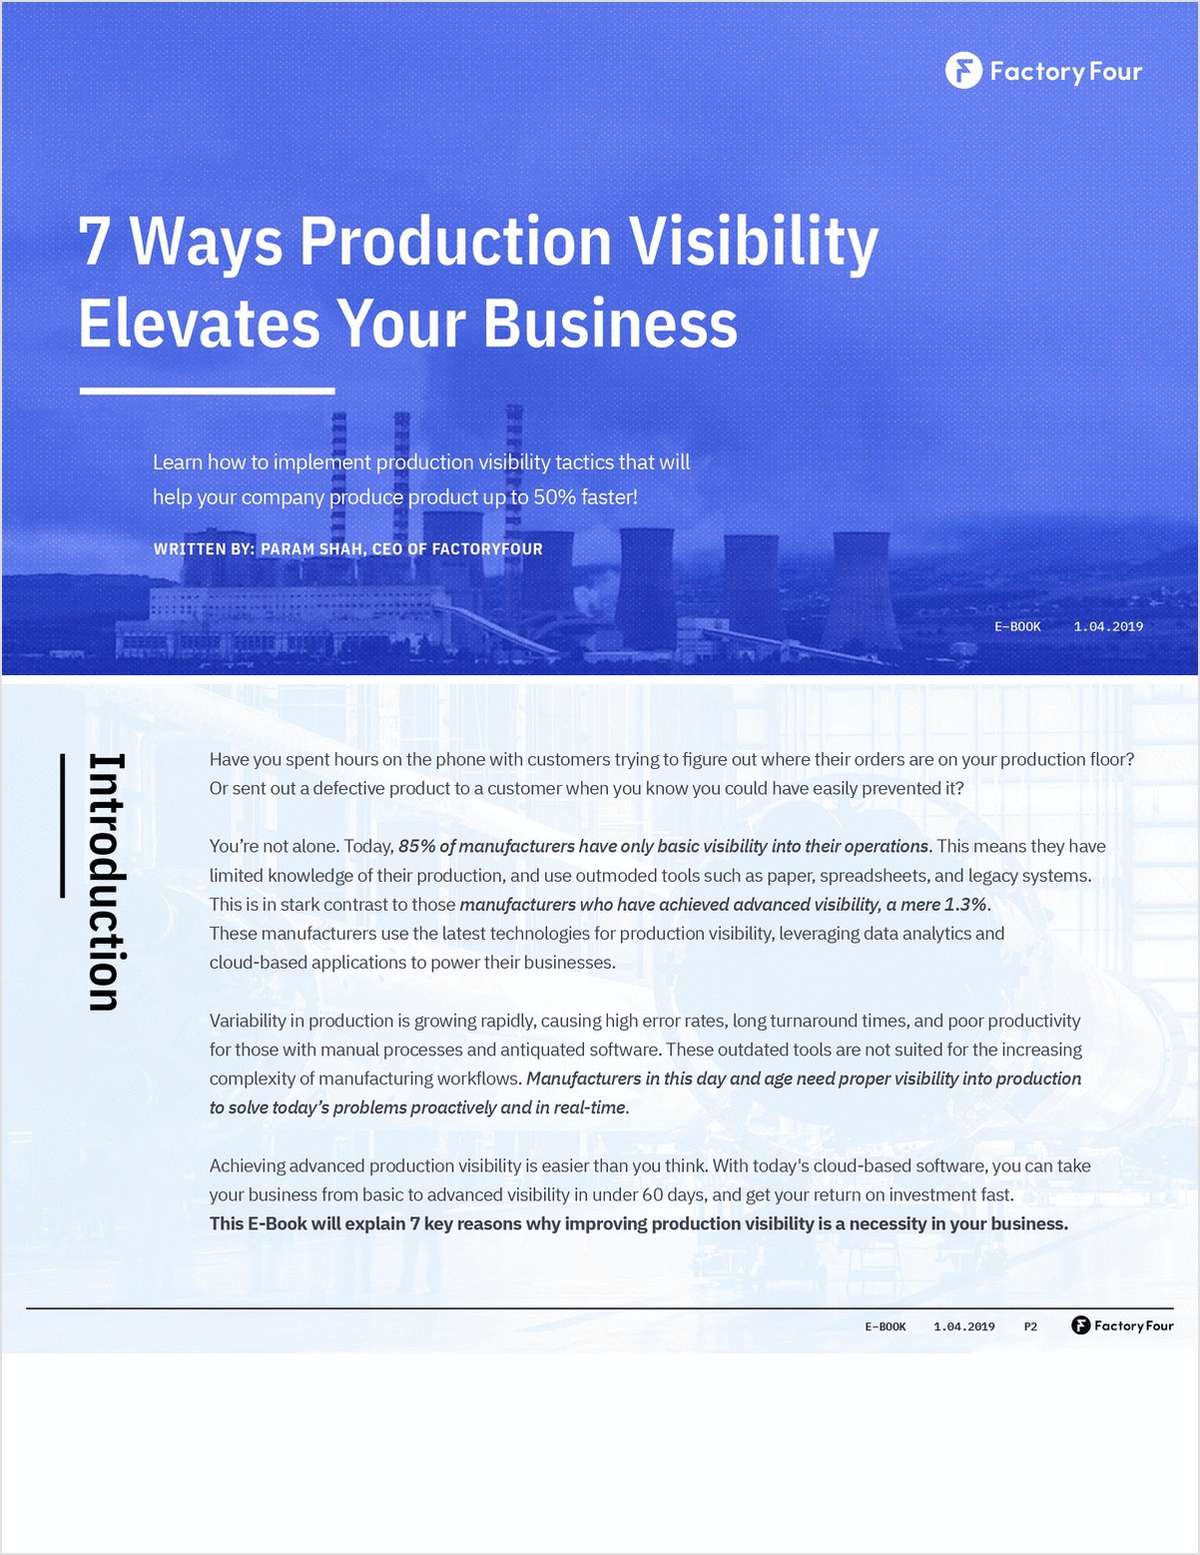 7 Ways Production Visibility Elevates Your Business